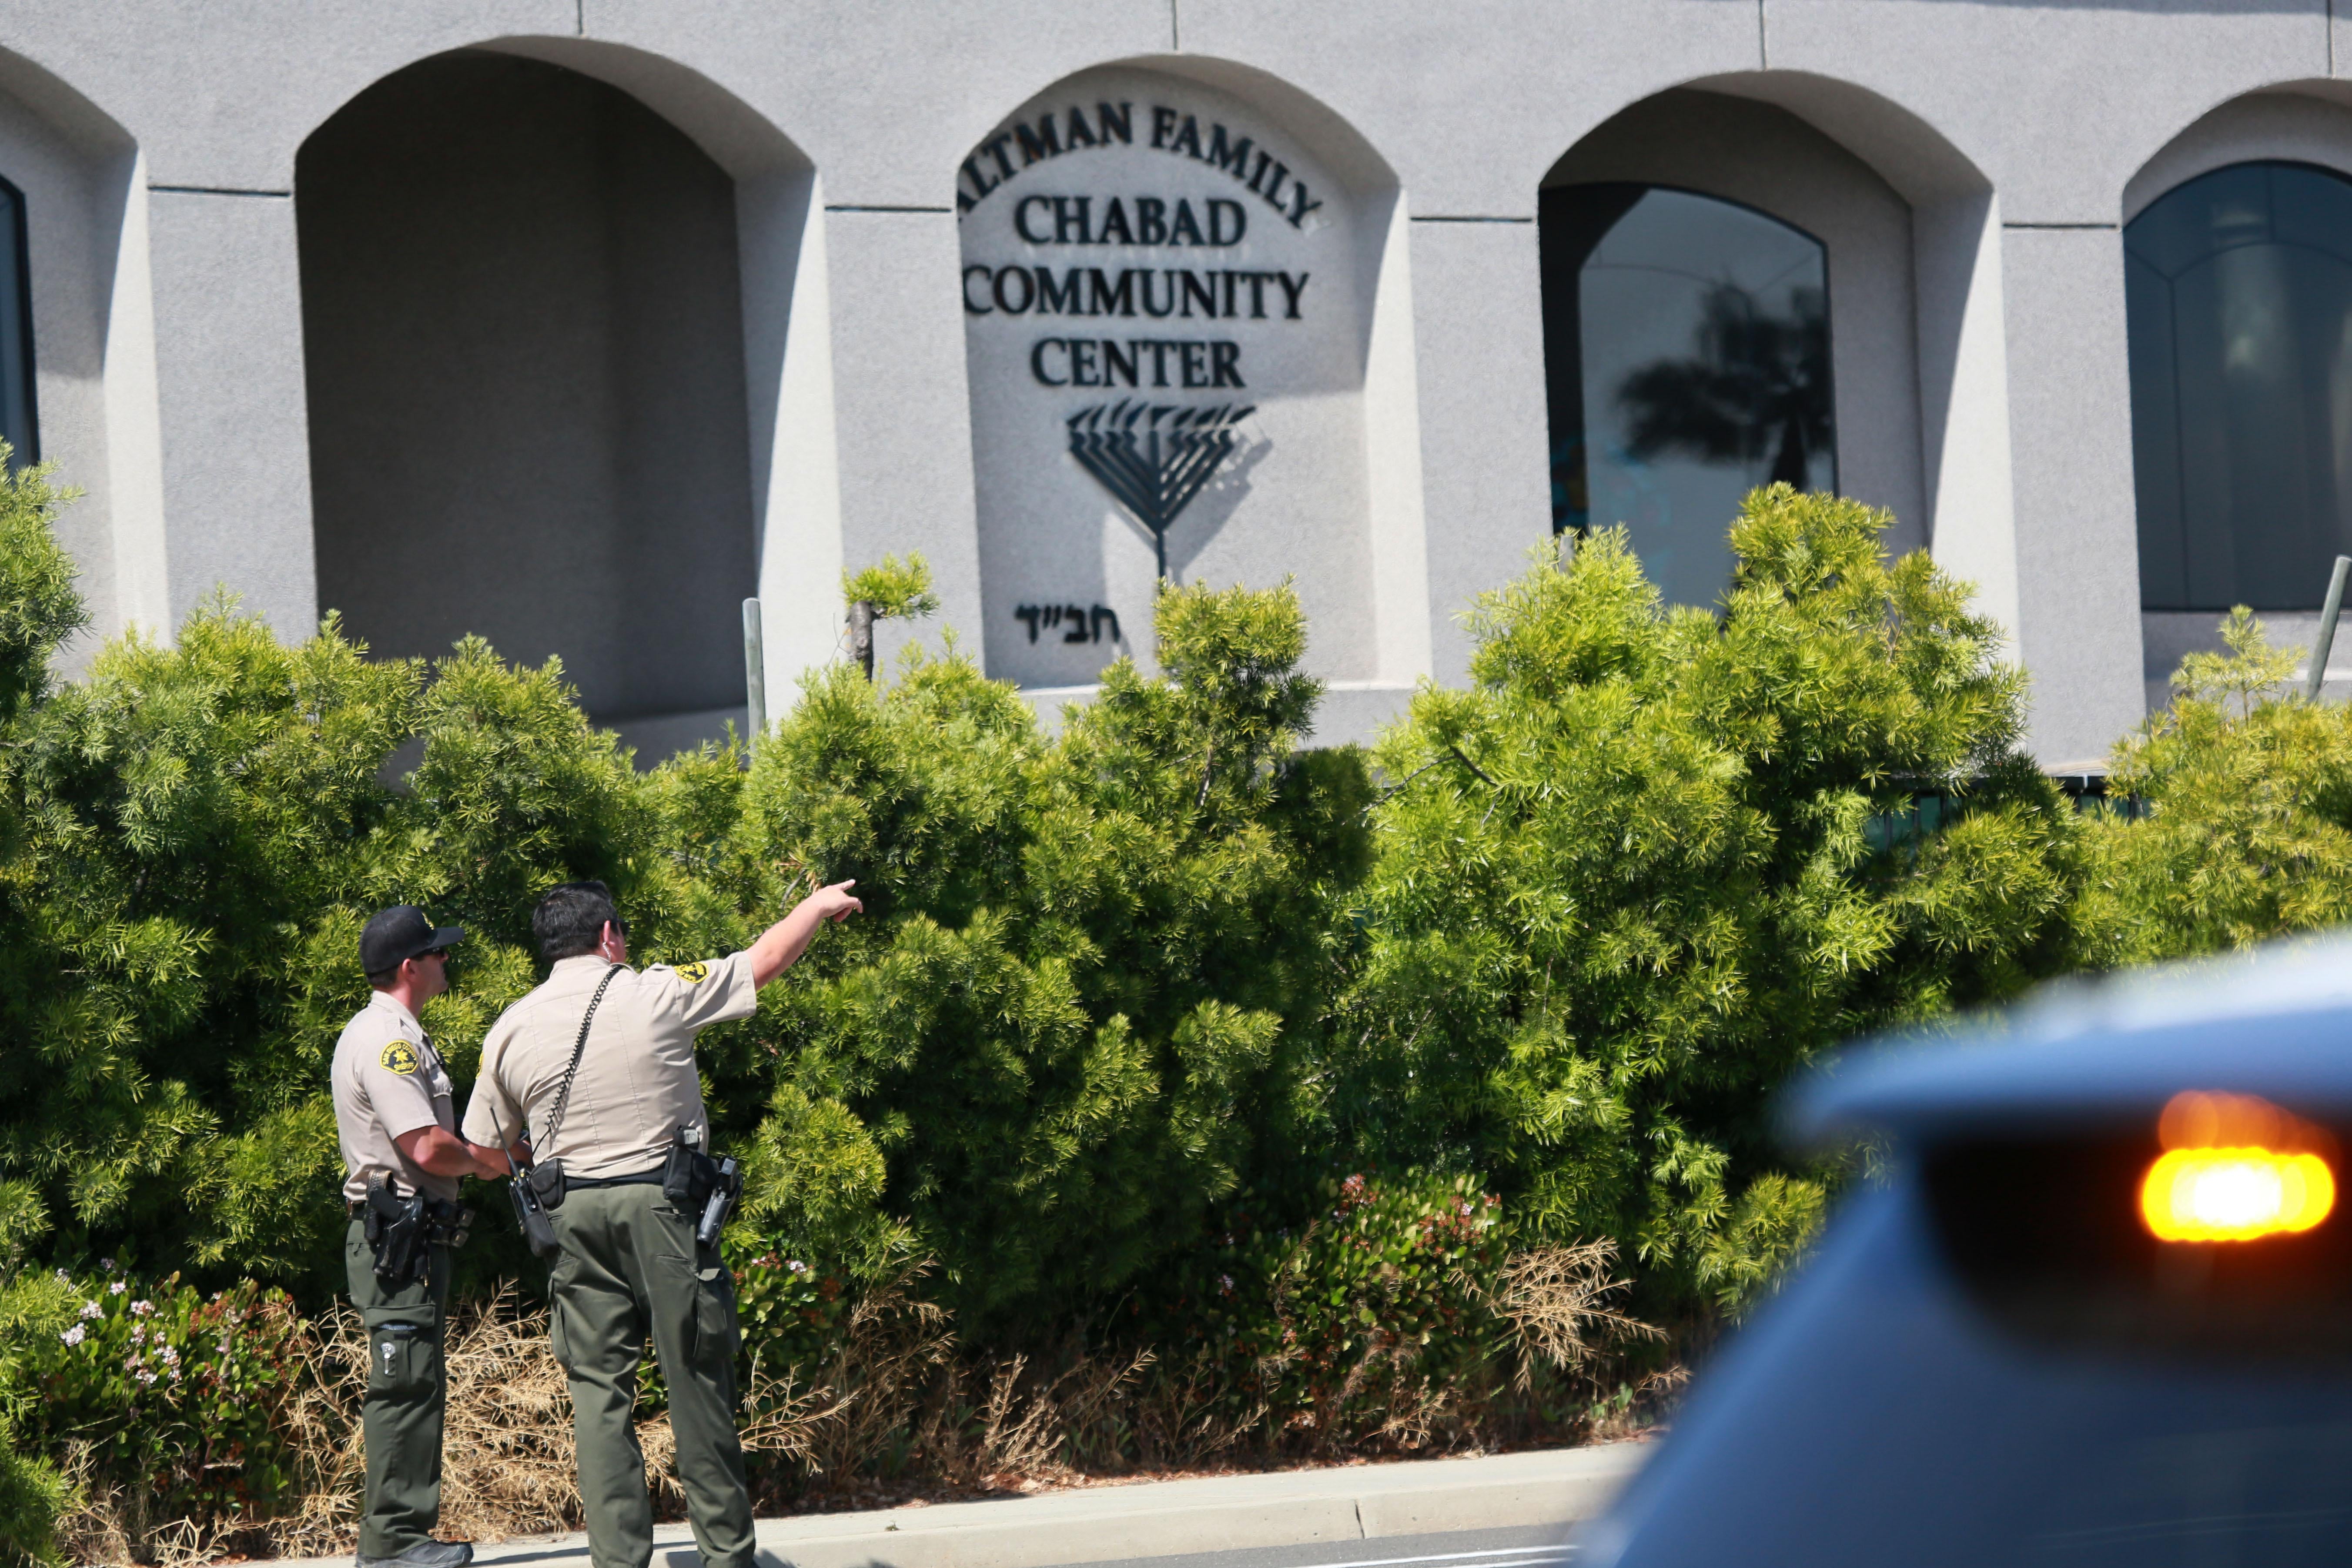 San Diego Sheriff deputies look over the Chabad of Poway Synagogue after a shooting on Saturday, April 27, 2019 in Poway, California. - A gunman opened fire at a synagogue in California, killing one person and injuring three others including the rabbi as worshippers marked the final day of Passover, officials said Saturday, April 27, 2019. The shooting in the town of Poway came exactly six months after a white supremacist shot dead 11 people at Pittsburgh's Tree of Life synagogue -- the deadliest attack on the Jewish community in the history of the United States. (Photo by SANDY HUFFAKER / AFP)        (Photo credit should read SANDY HUFFAKER/AFP/Getty Images)